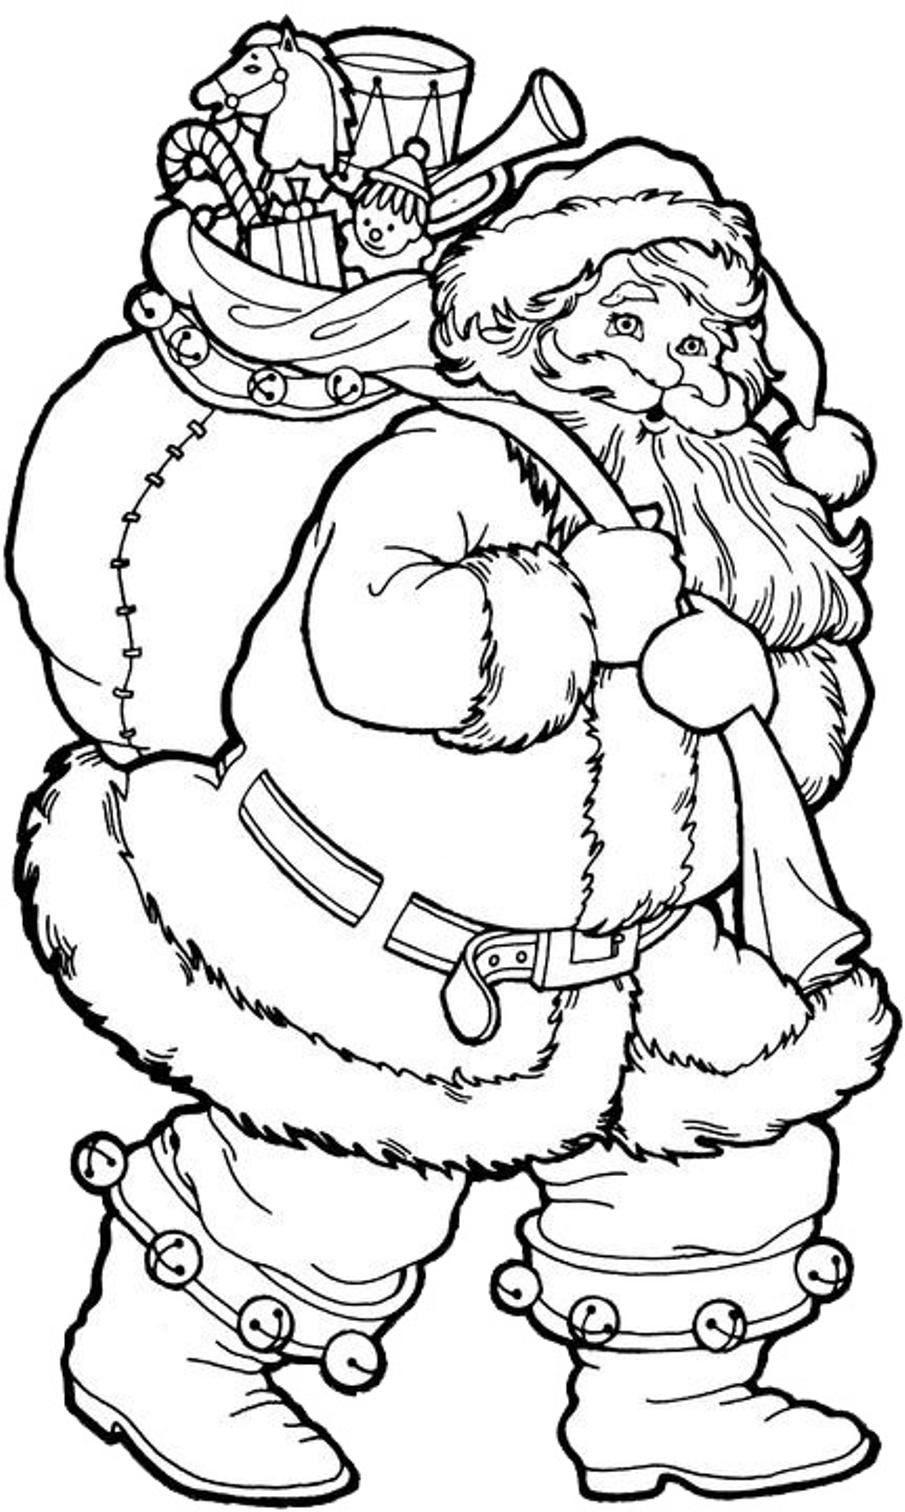 Father Christmas Coloring Pages at GetColorings.com | Free printable